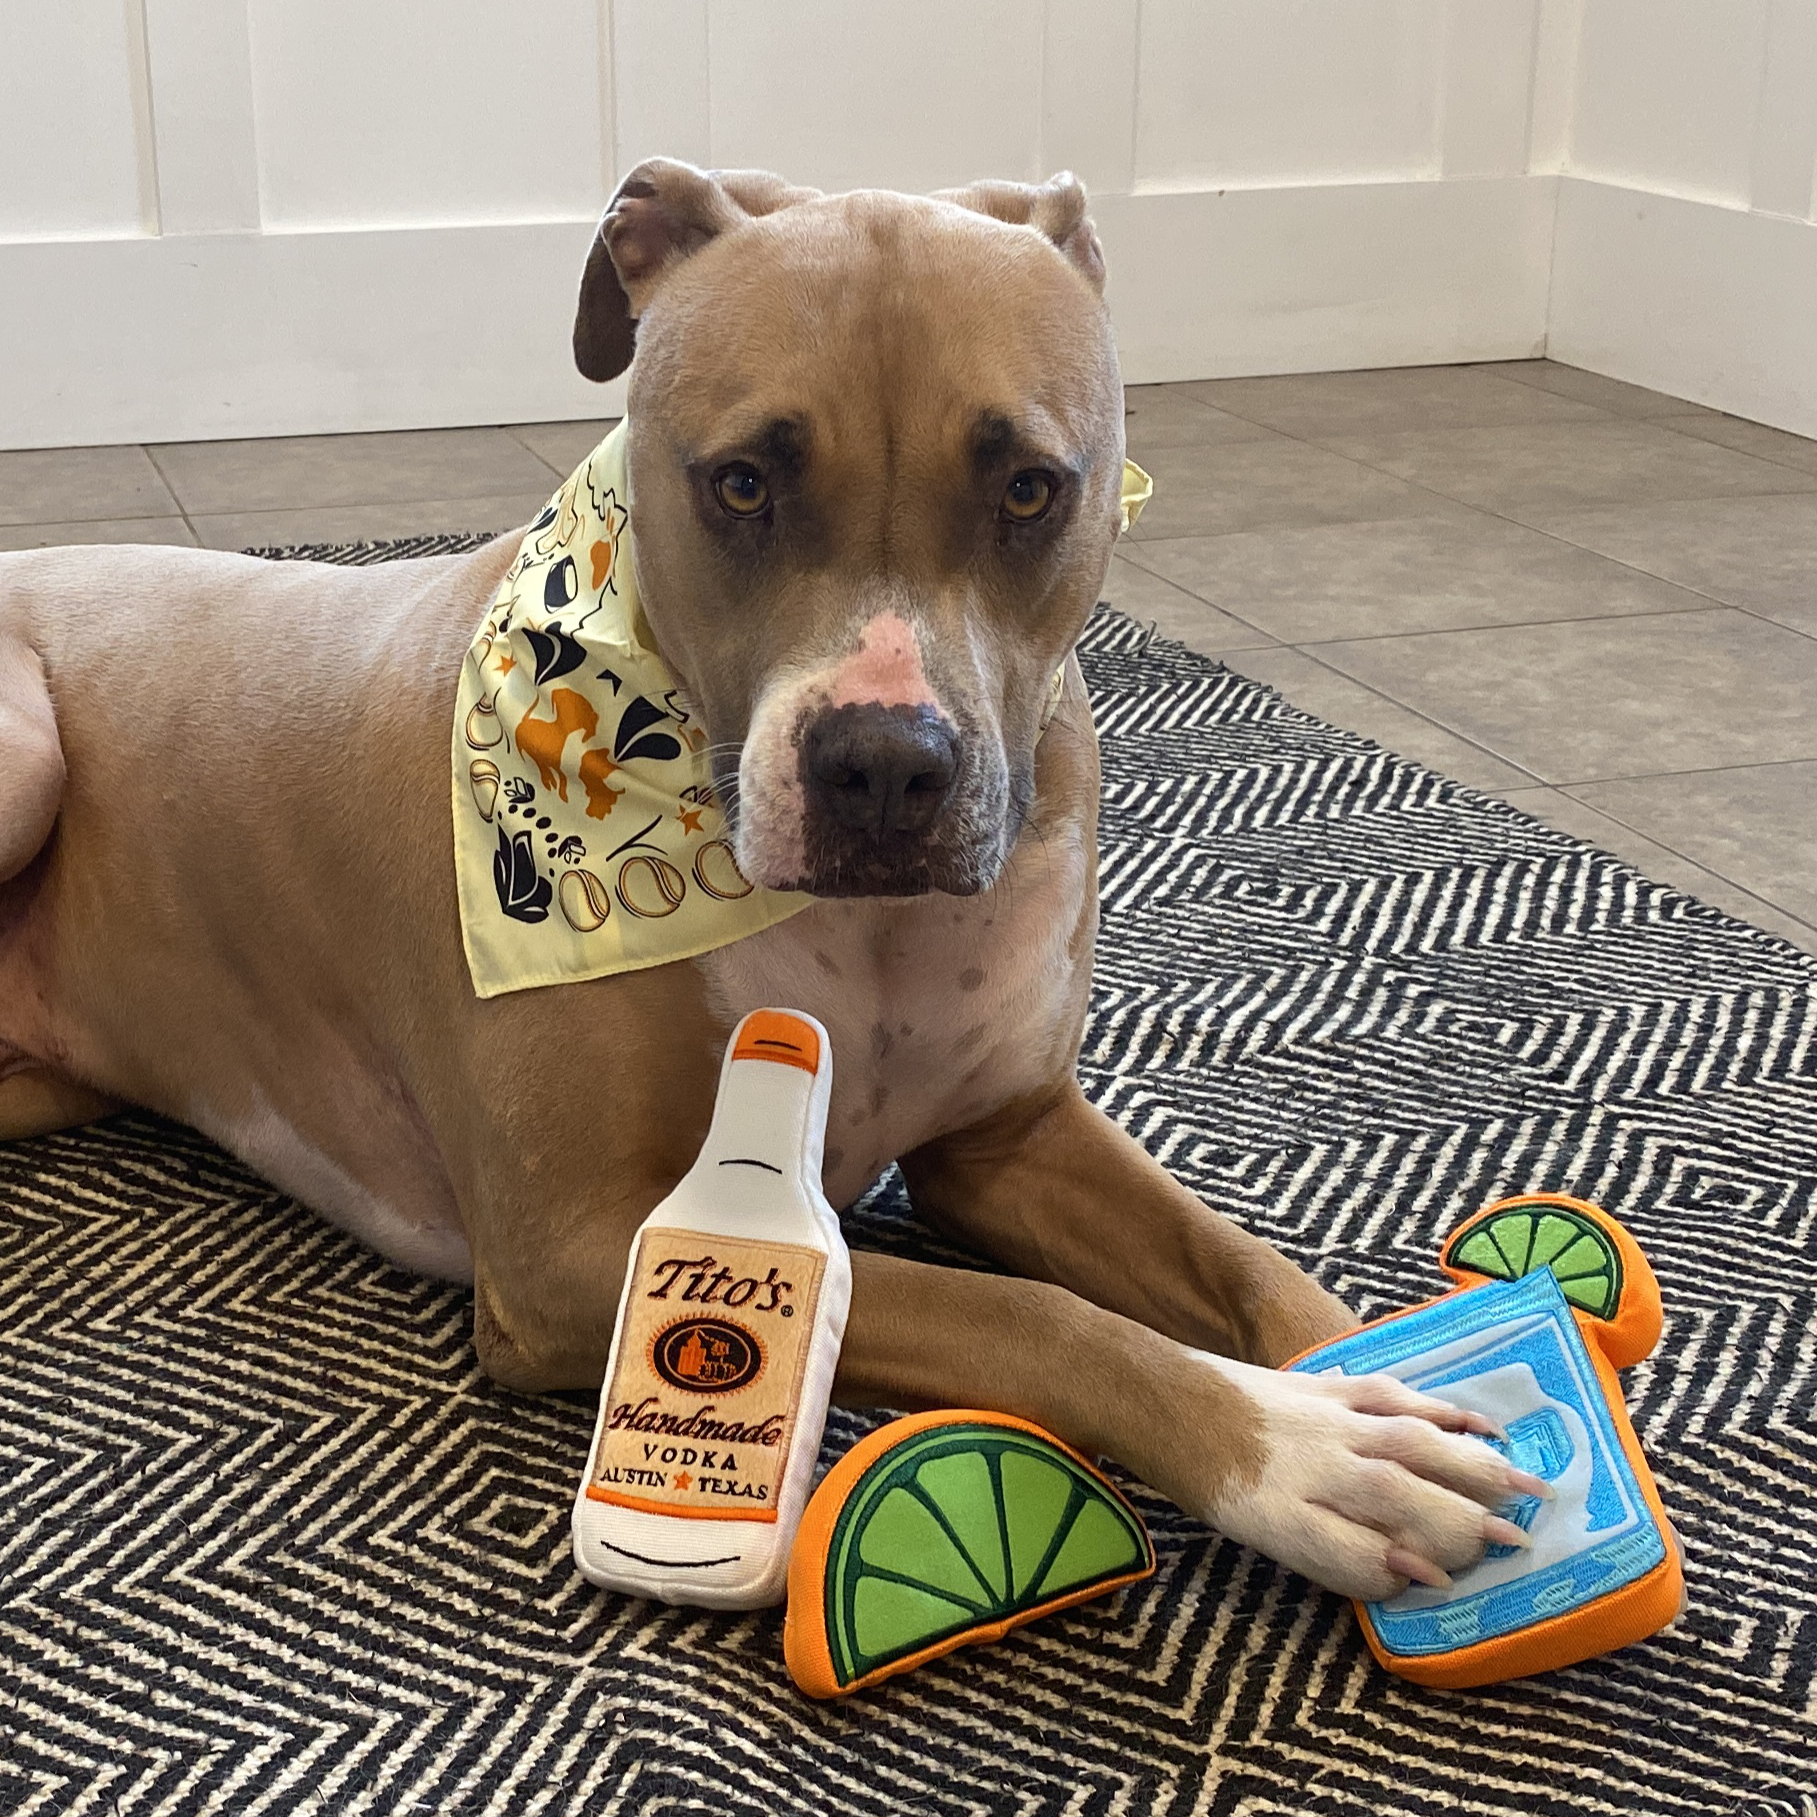 American Bulldog Lab wearing Vodka for Dog People bandana playing with Tito's Bottle Toy, Tito's Puptail toy, and Tito's Squeeze lime toy